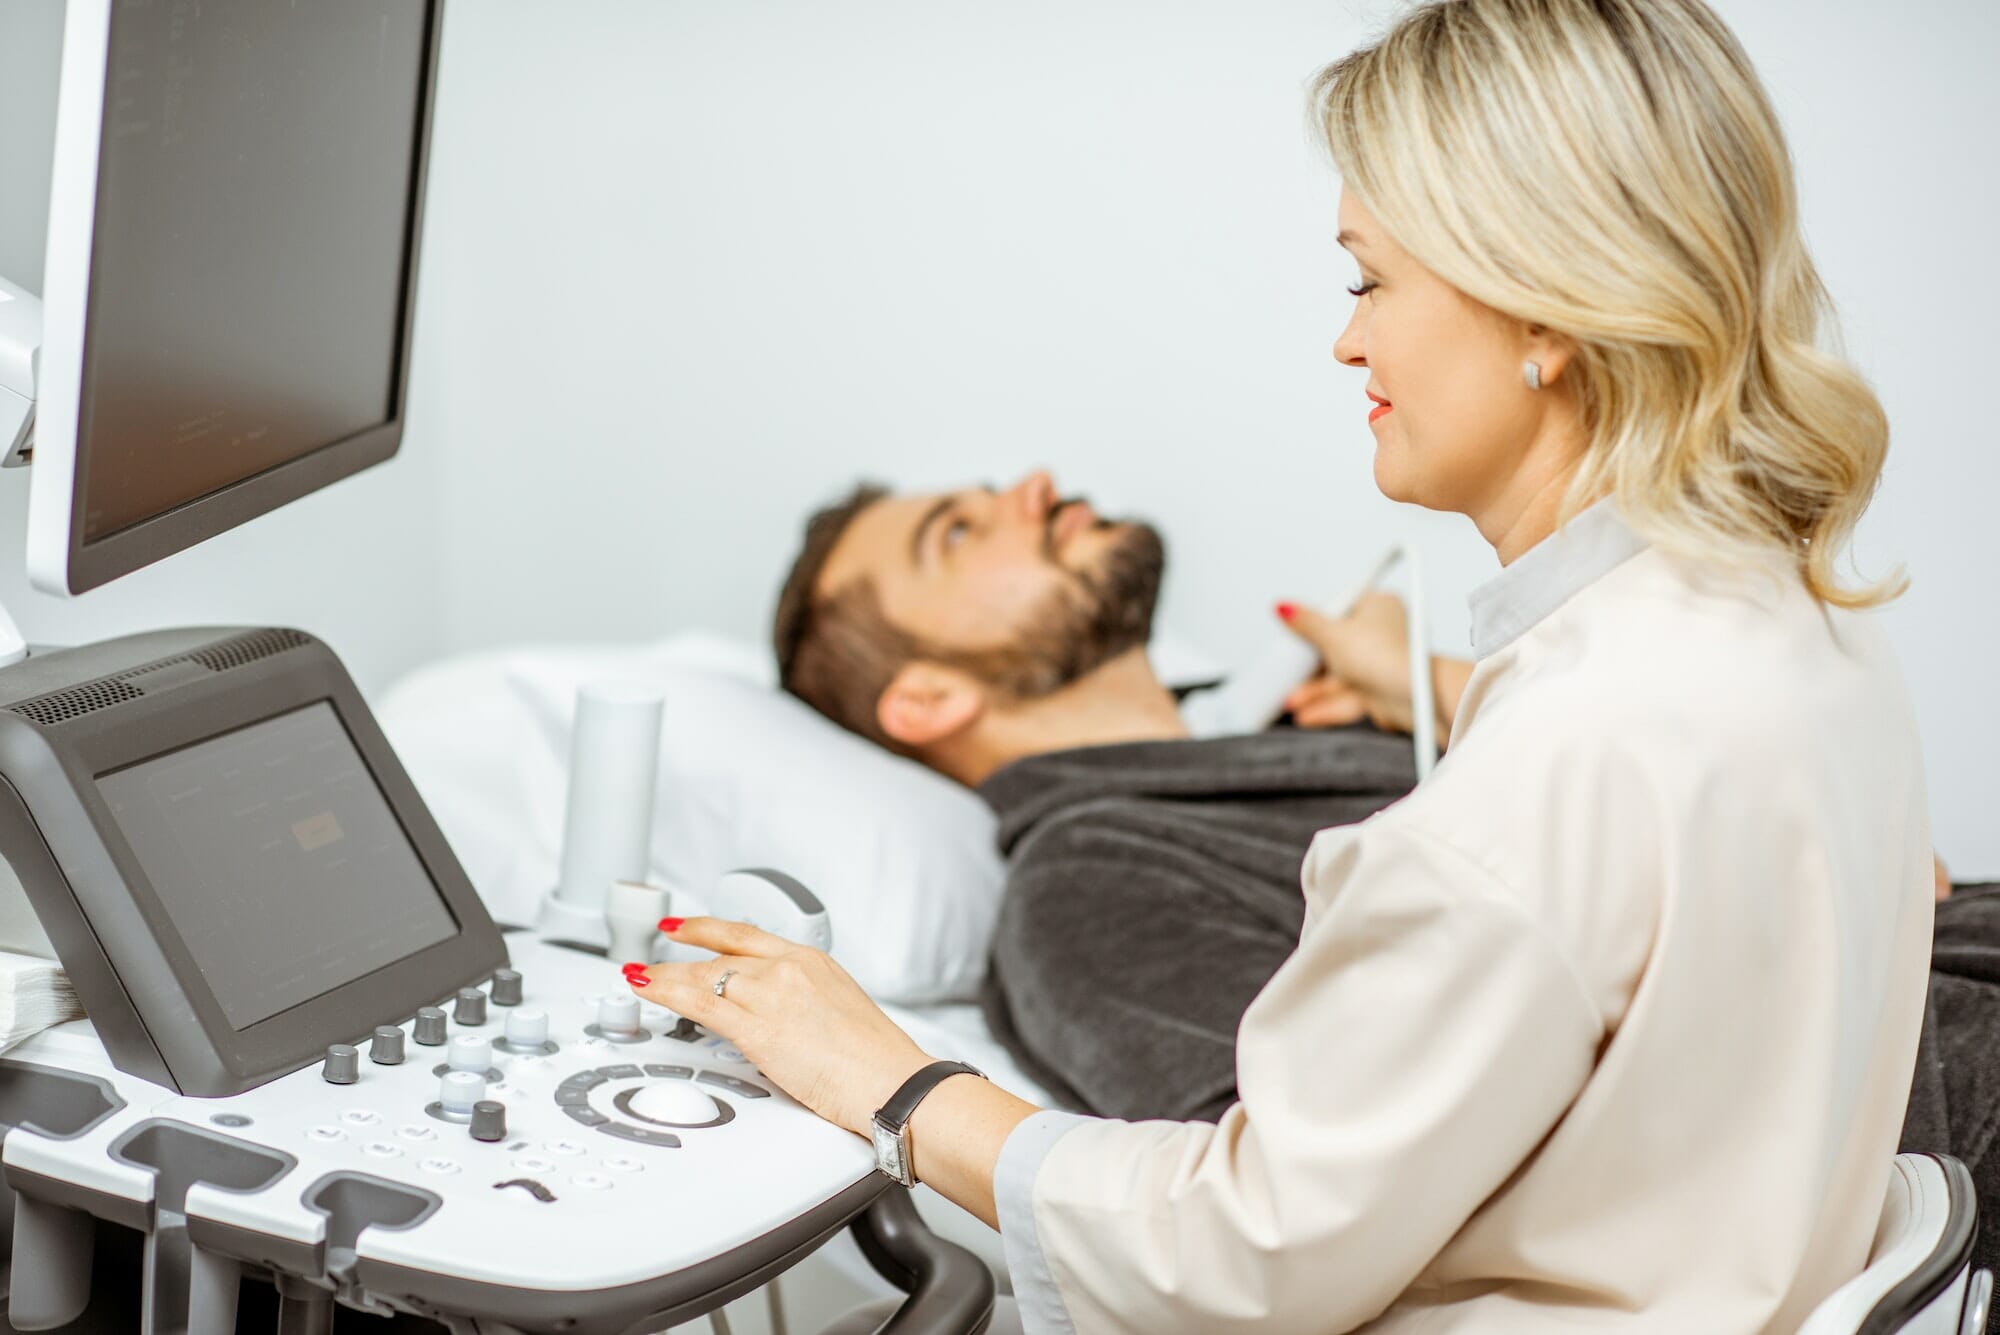 Doctor examining men's thyroid with ultrasound